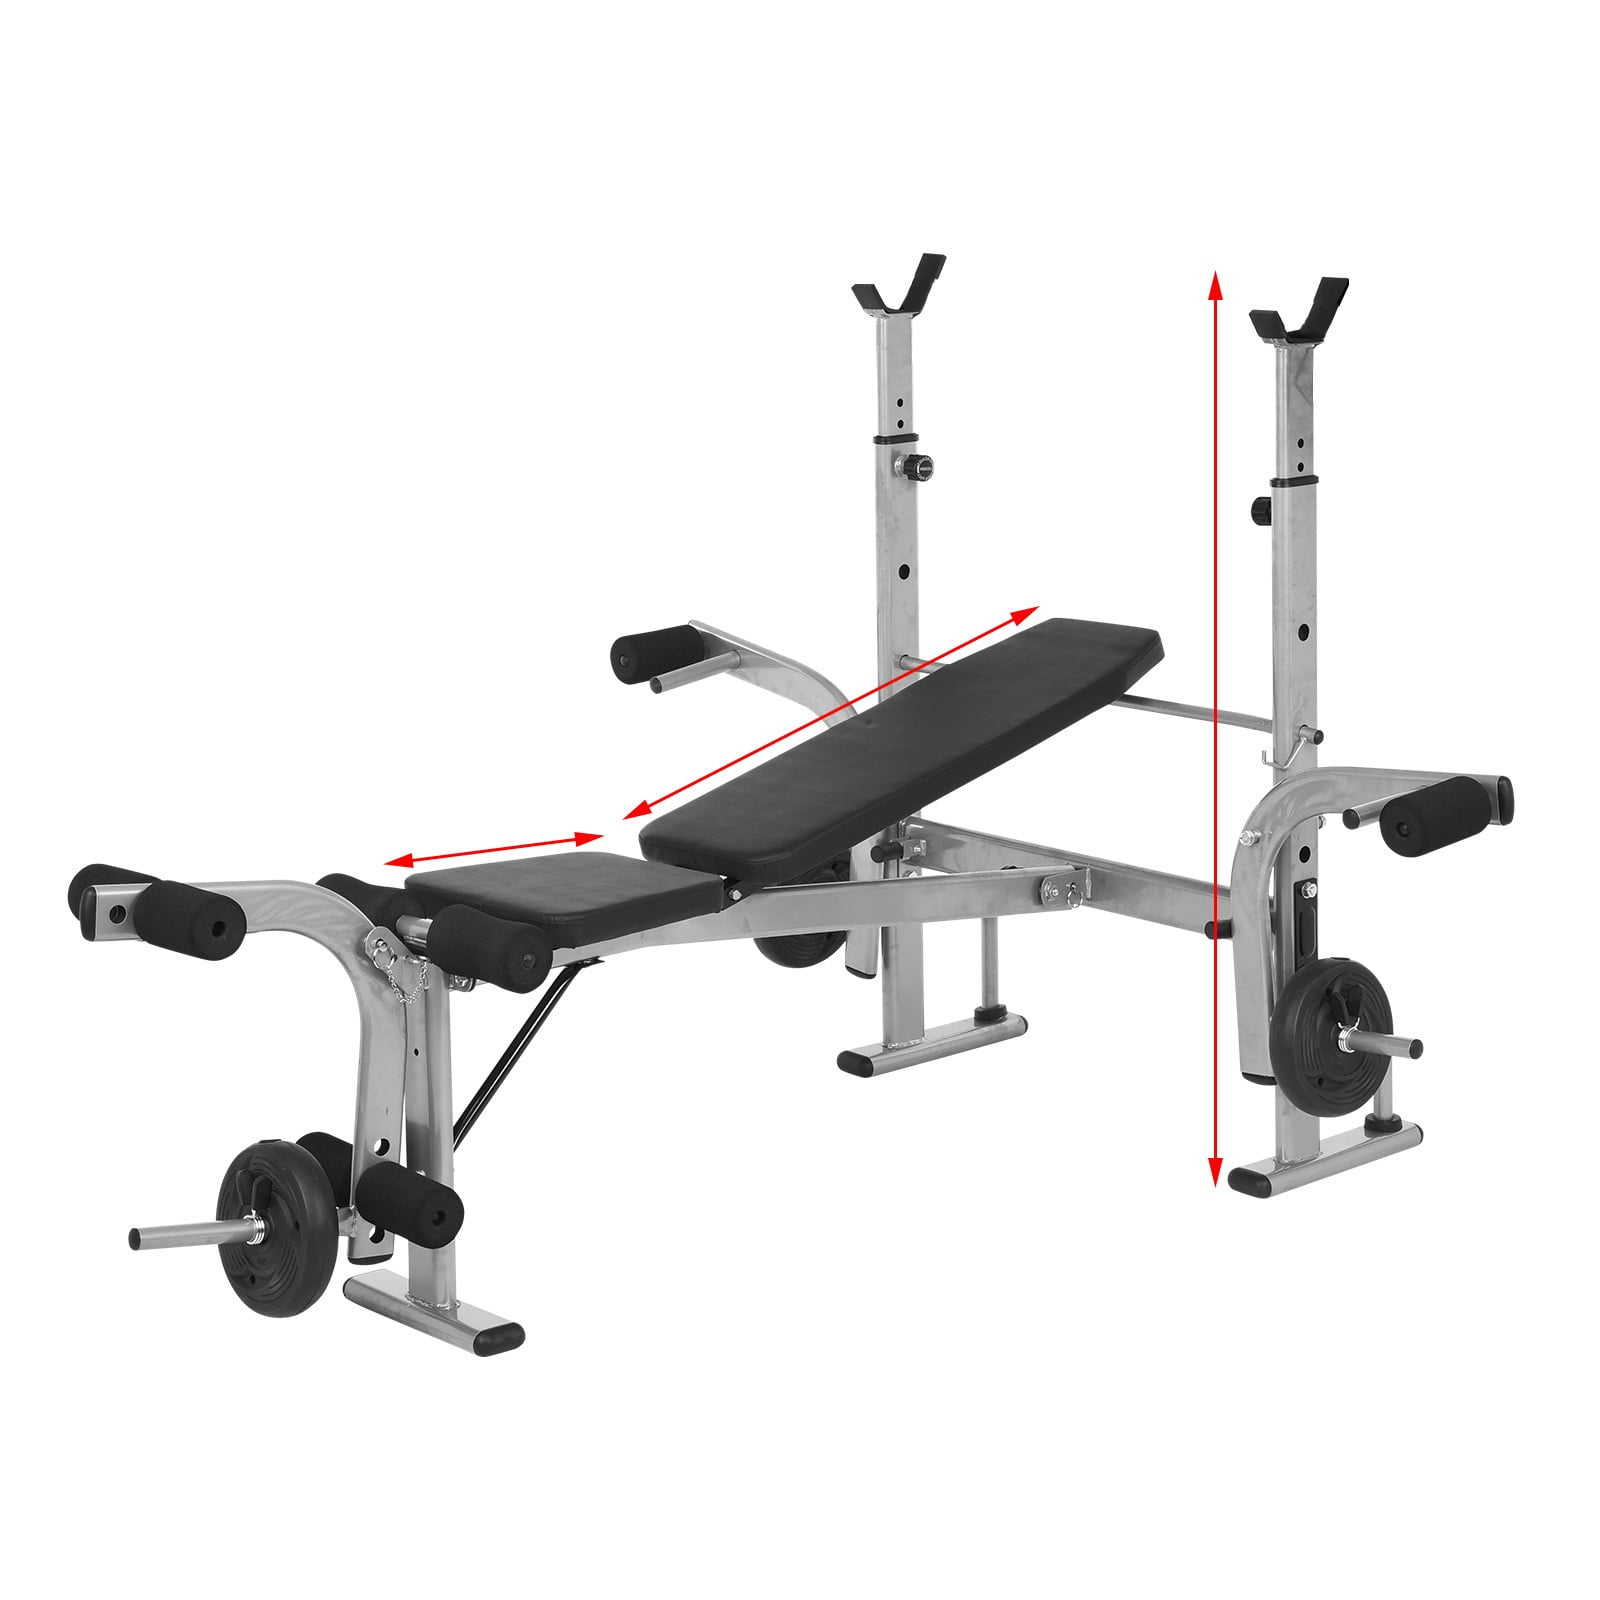 Details about   ADJUSTABLE WEIGHT BENCH PRESS BARBELL RACK EXERCISE STRENGTH TRAINING WORKOUT US 